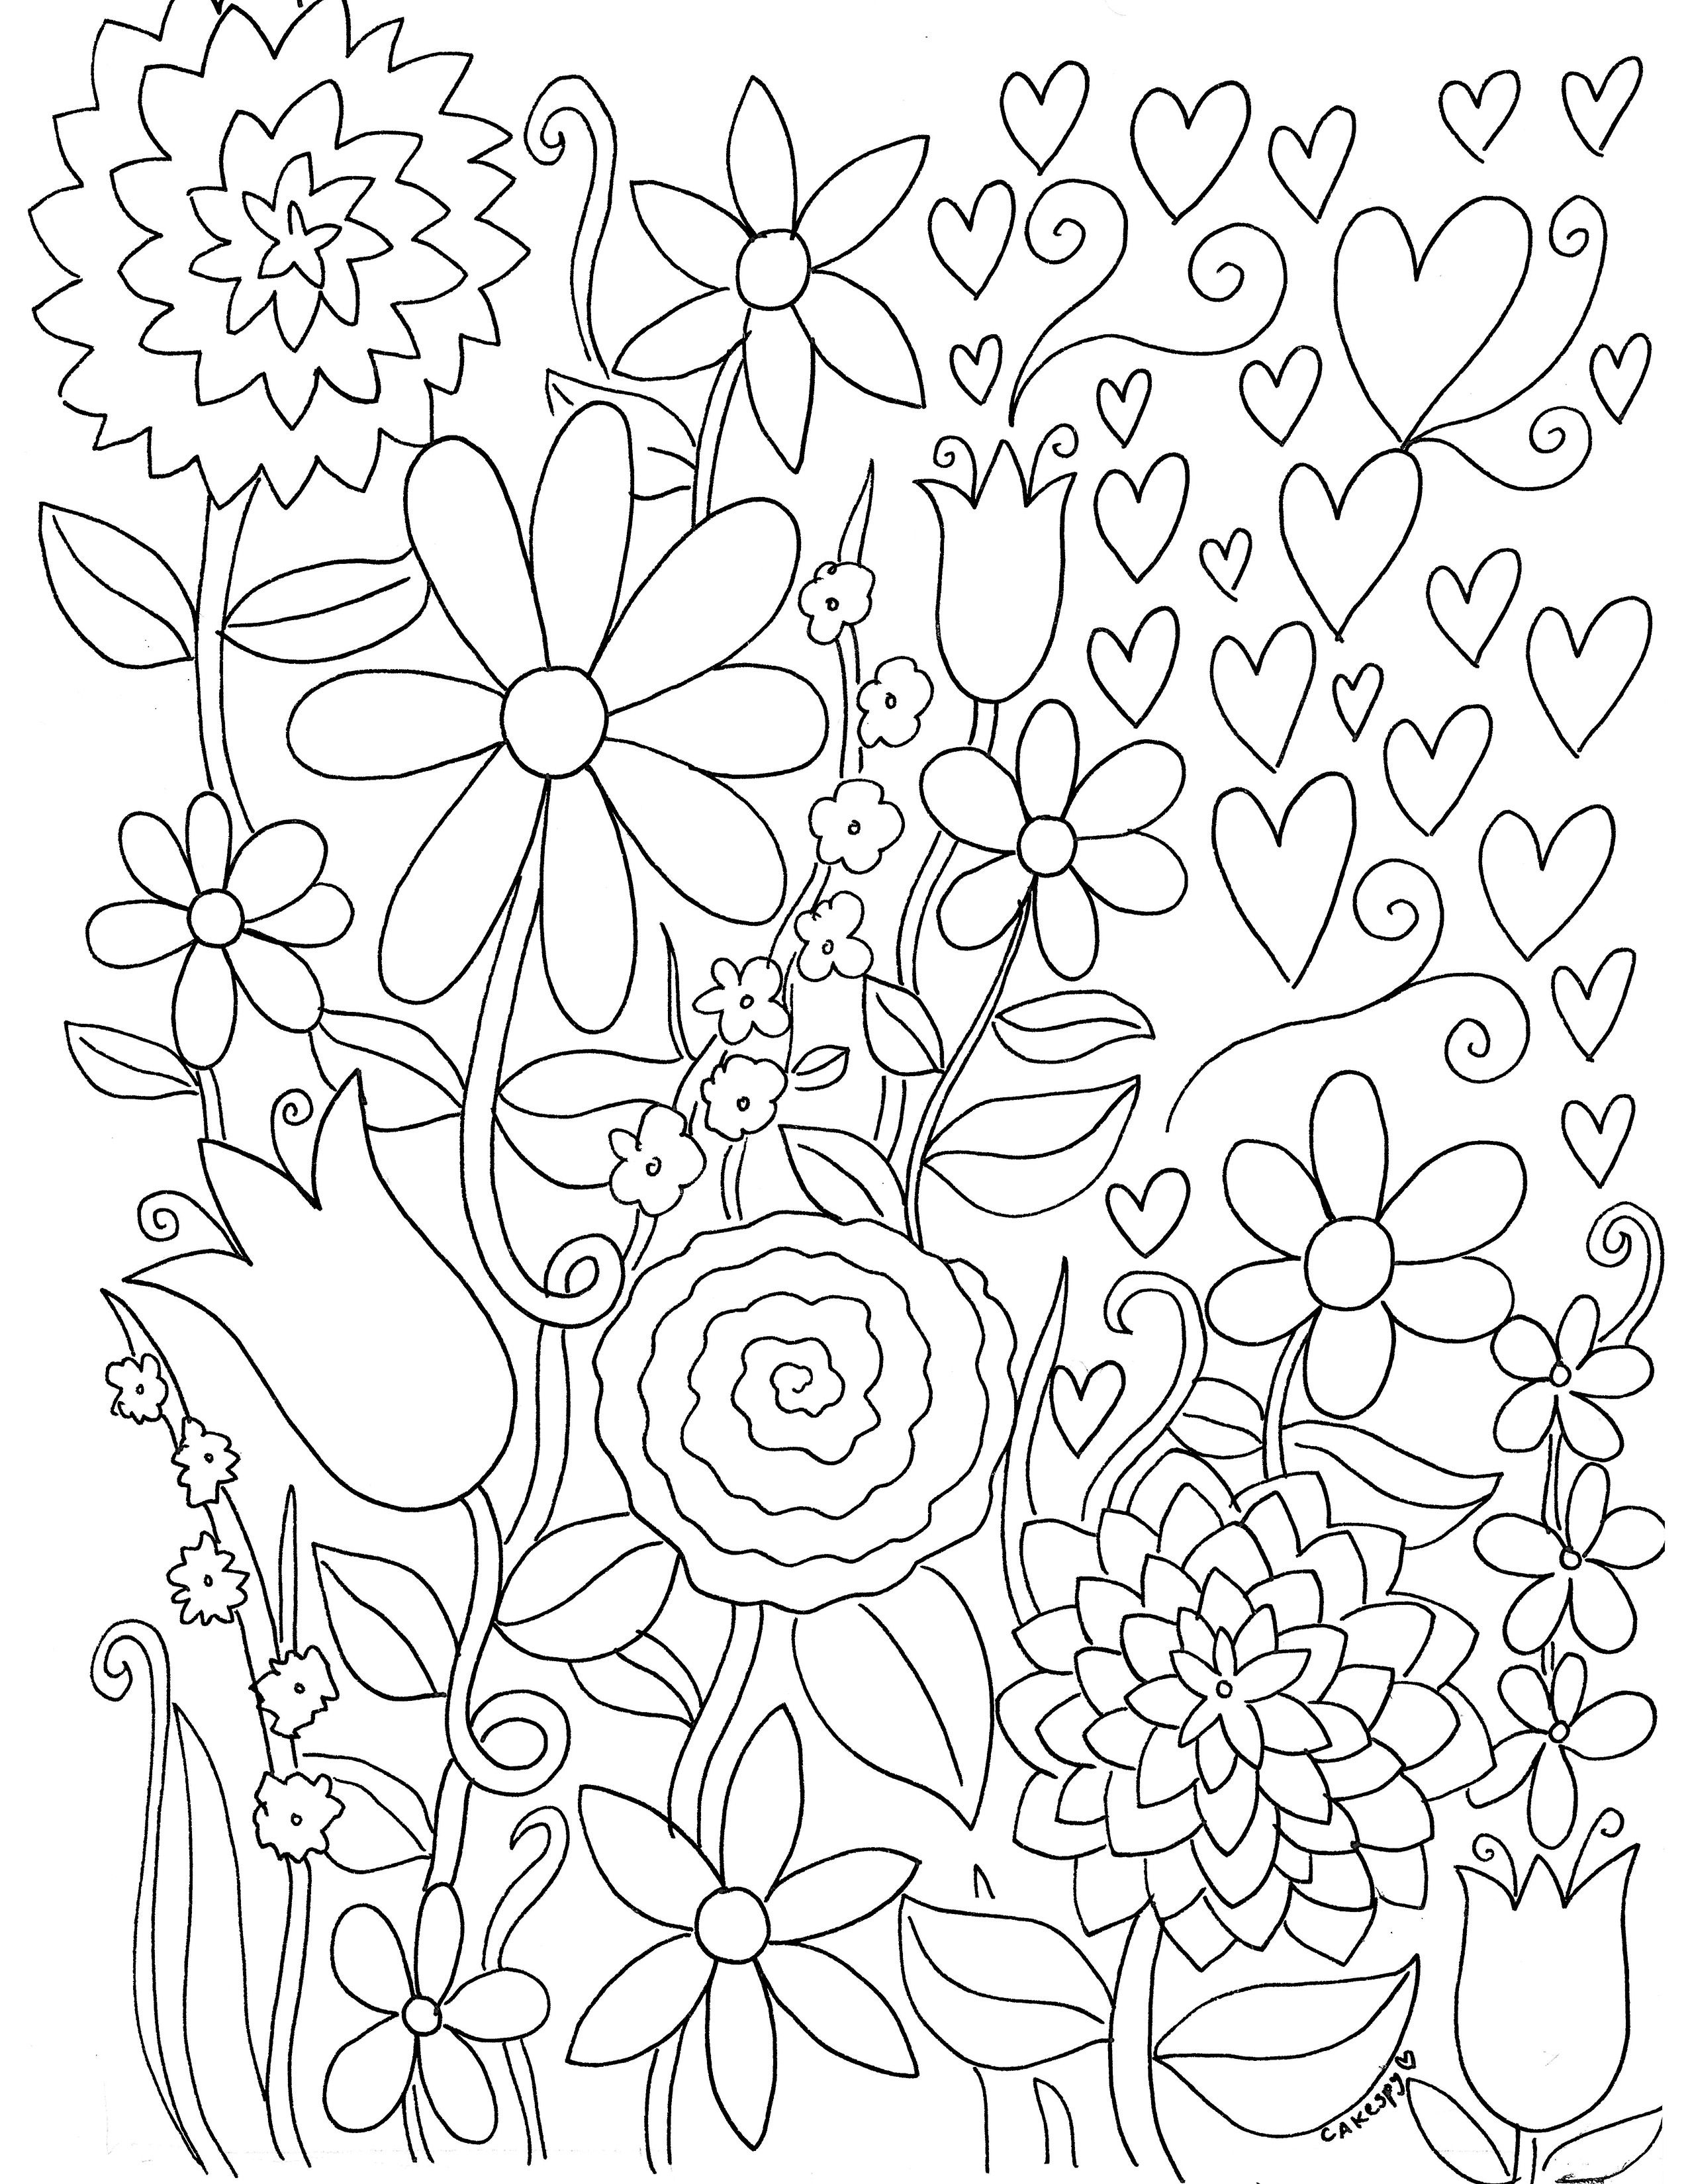 Free Paintnumbers For Adults Downloadable | *printable Art - Free Printable Paint By Number Coloring Pages